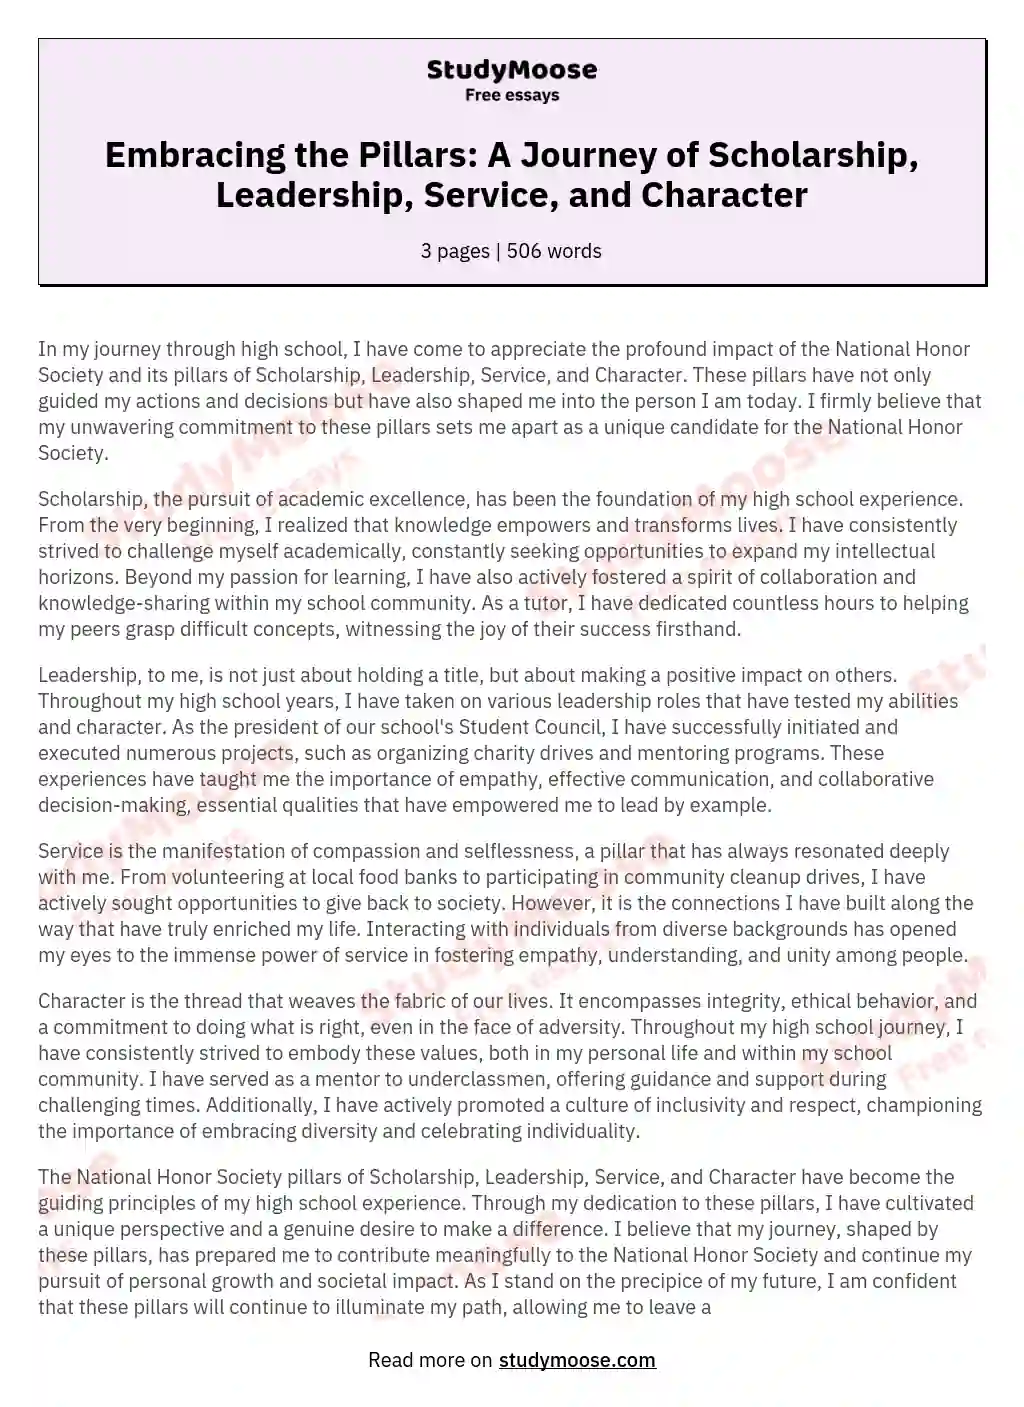 essay on scholarship leadership service and character